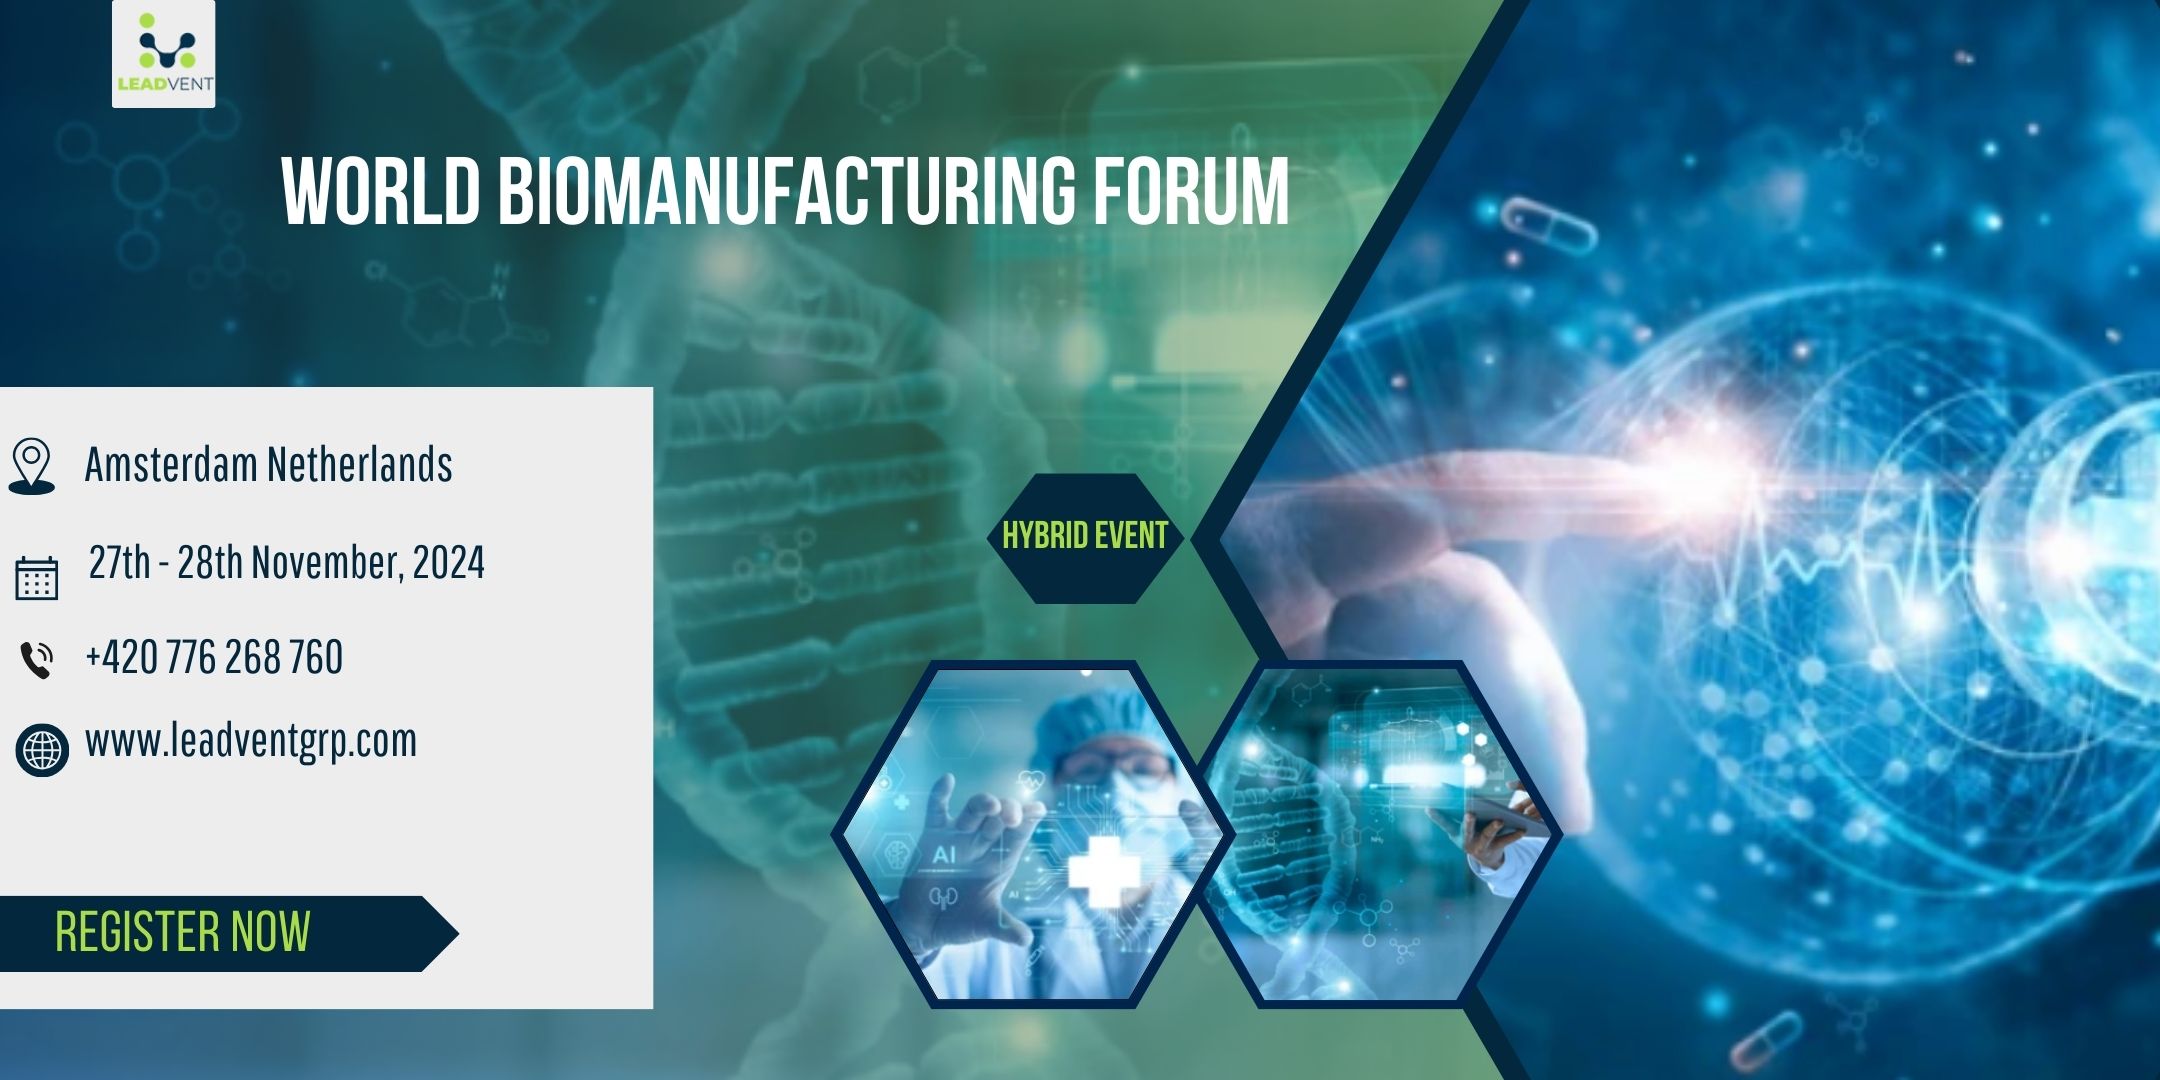 World Biomaufacturing Forum organized by Leadvent Group